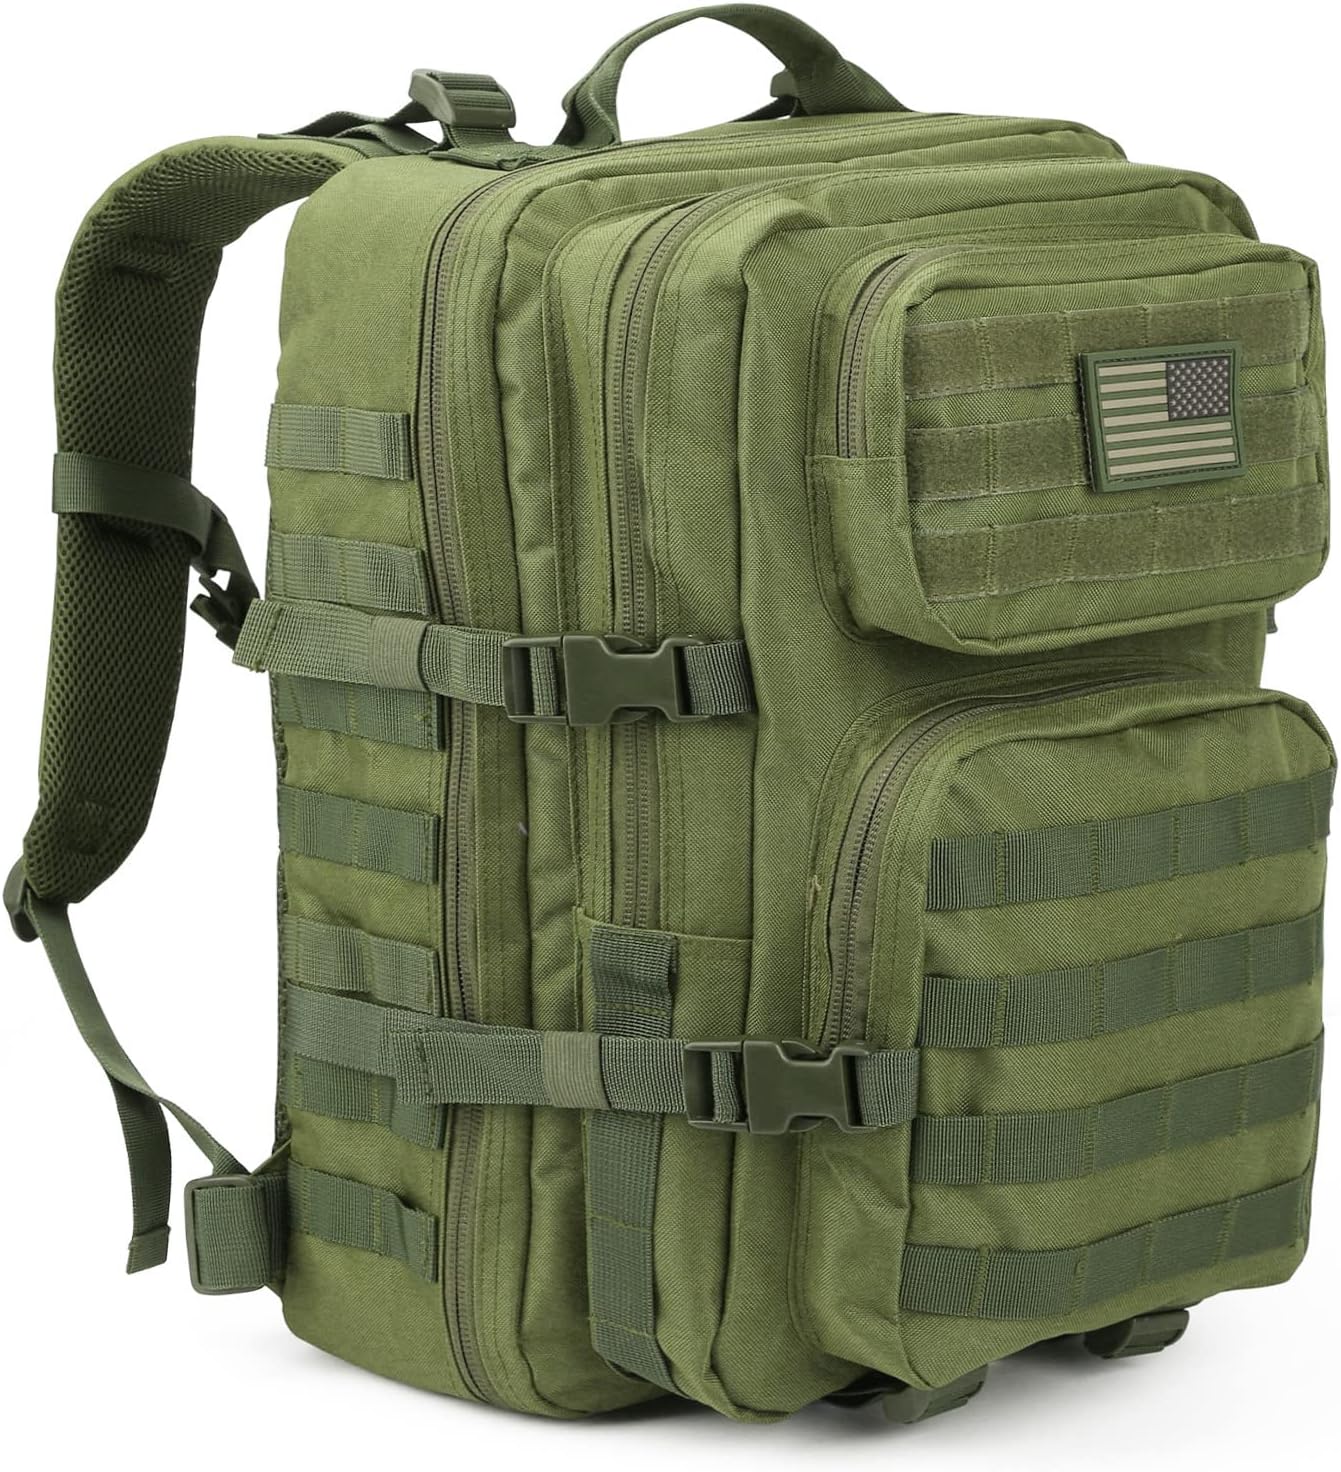 Heavy-Duty Tactical Daypack Army Backpack with Molle Webbing, Green